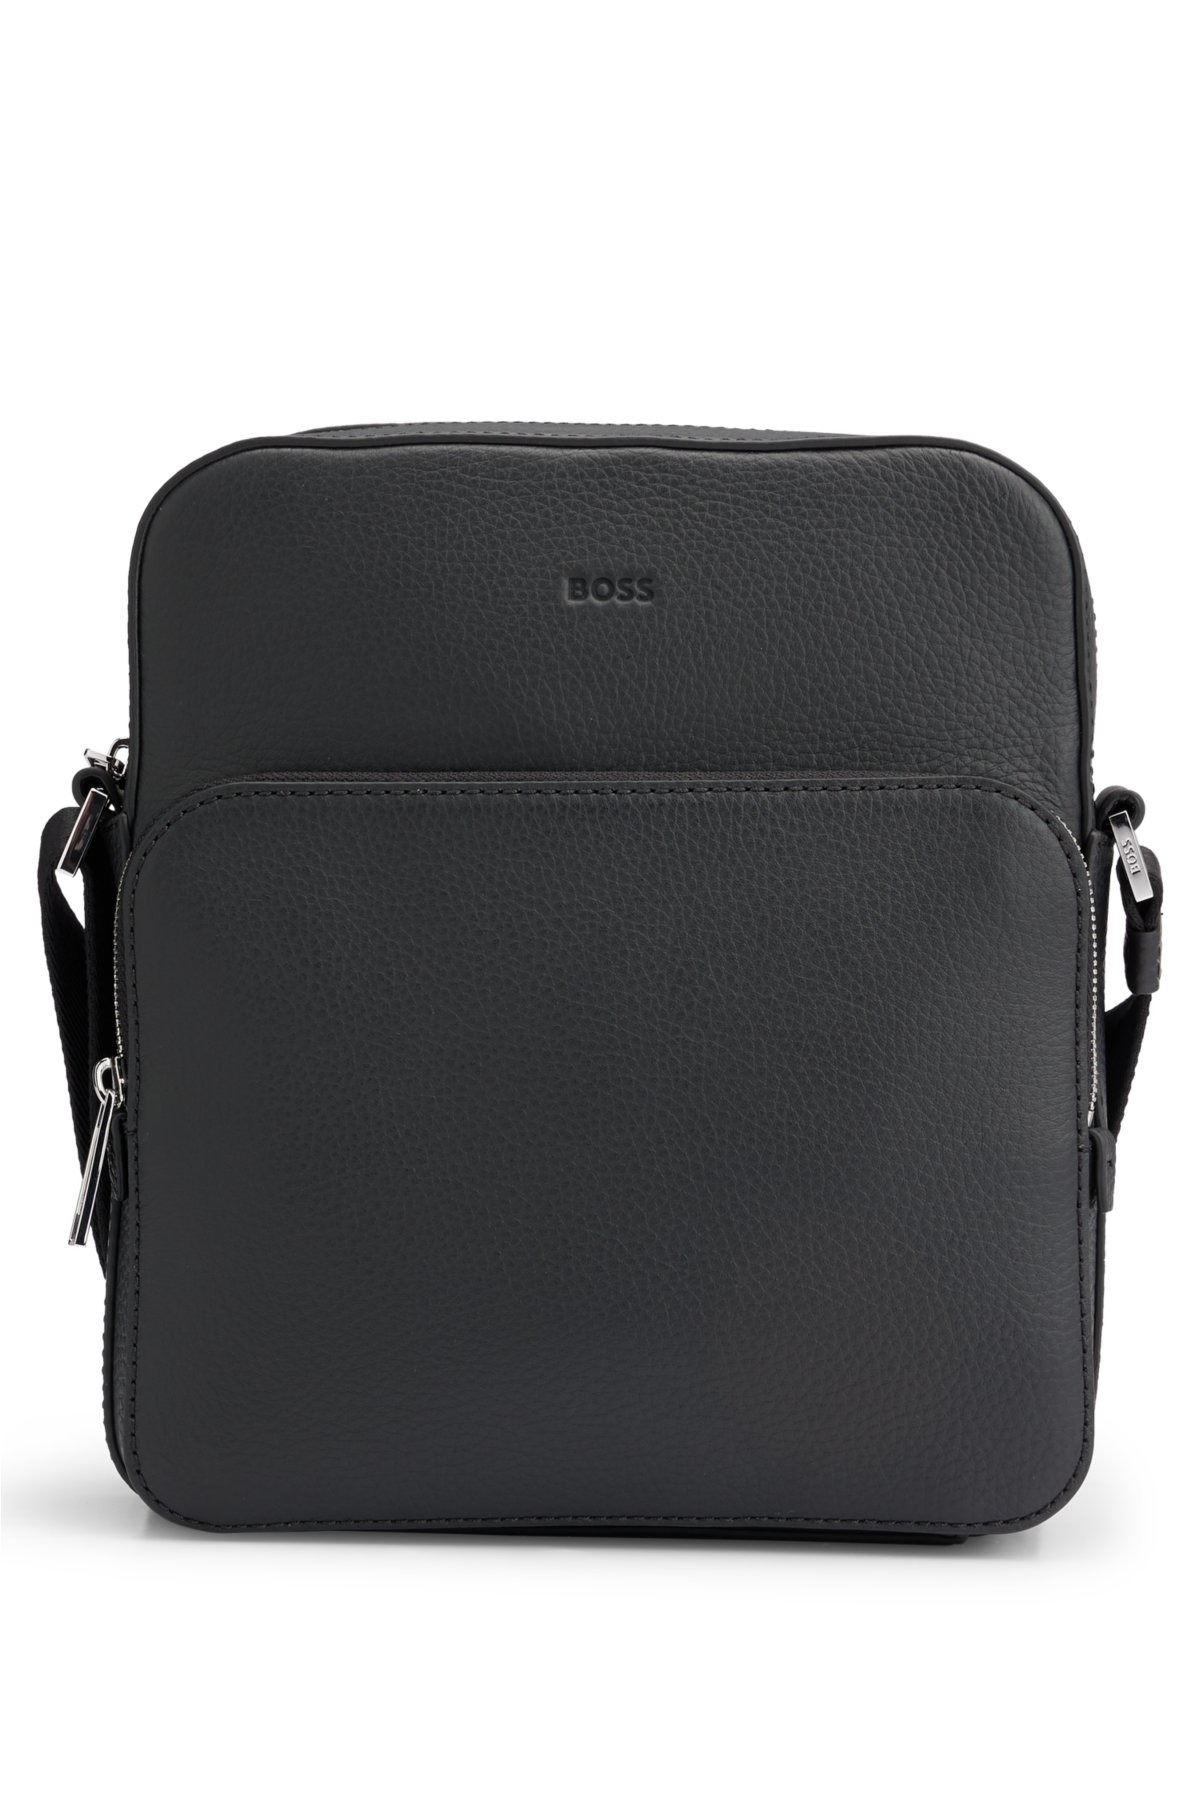 BOSS - Reporter bag in grained Italian leather with embossed logo